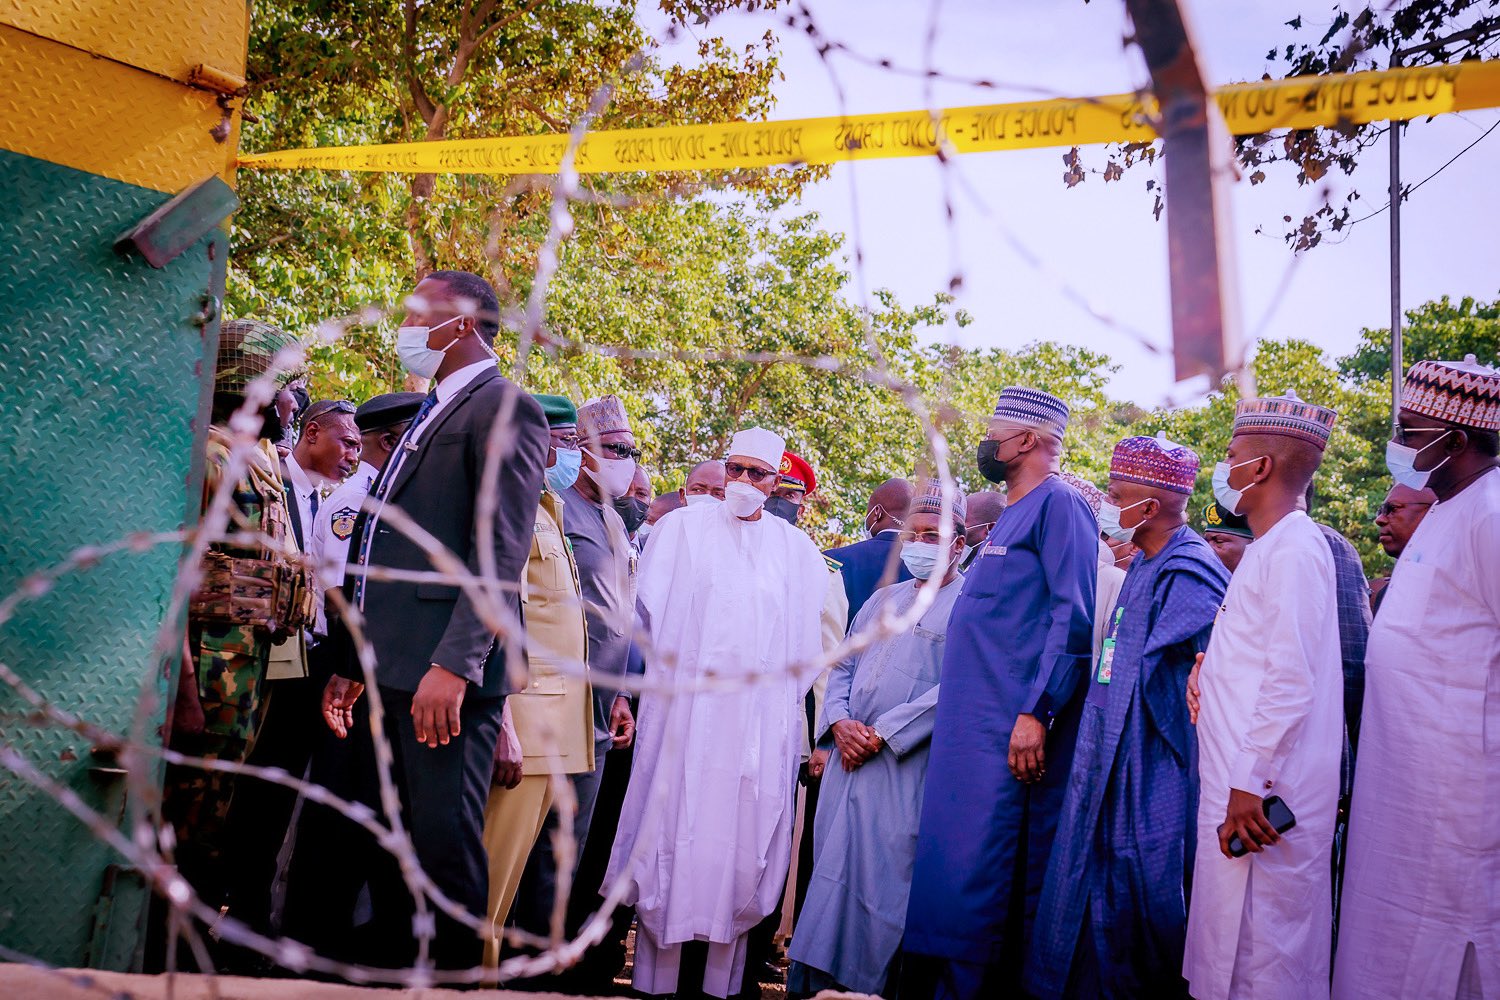 Nigerian President Muhammadu Buhari (centre, in white) visited the Kuje prison in Abuja, where the Islamic State of West Africa Province (ISWAP) recently orchestrated an attack that led to the escape of over 800 inmates, including 63 Boko Haram militants.